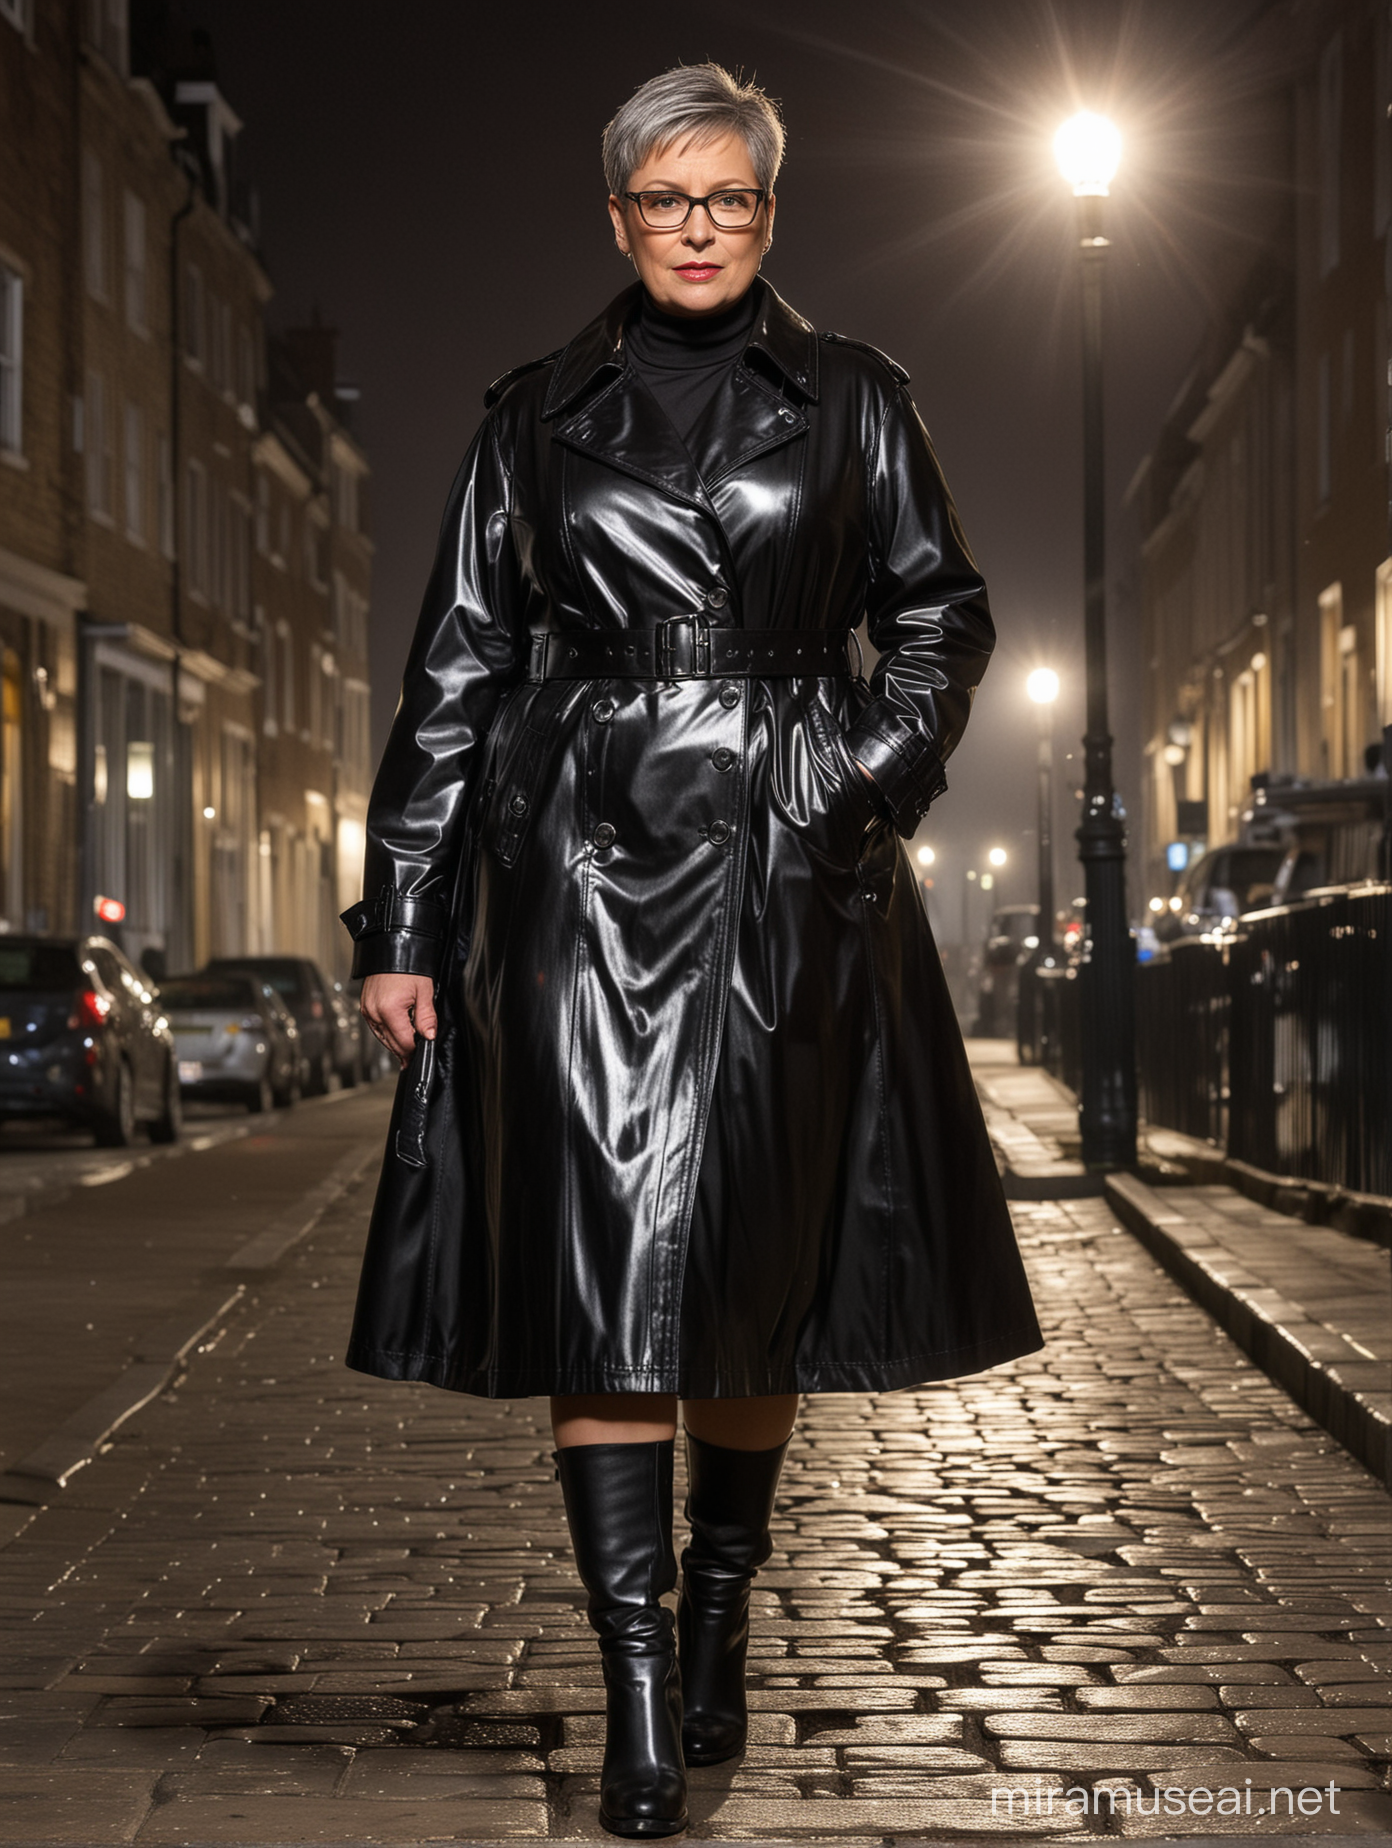 attractive, dominant, confident,  older, mature woman, very short hair, glasses, chubby full figure, thick very shiny black PVC trench coat, fully belted and buttoned, long skirt, shiny boots, walking at night, serious look, 

